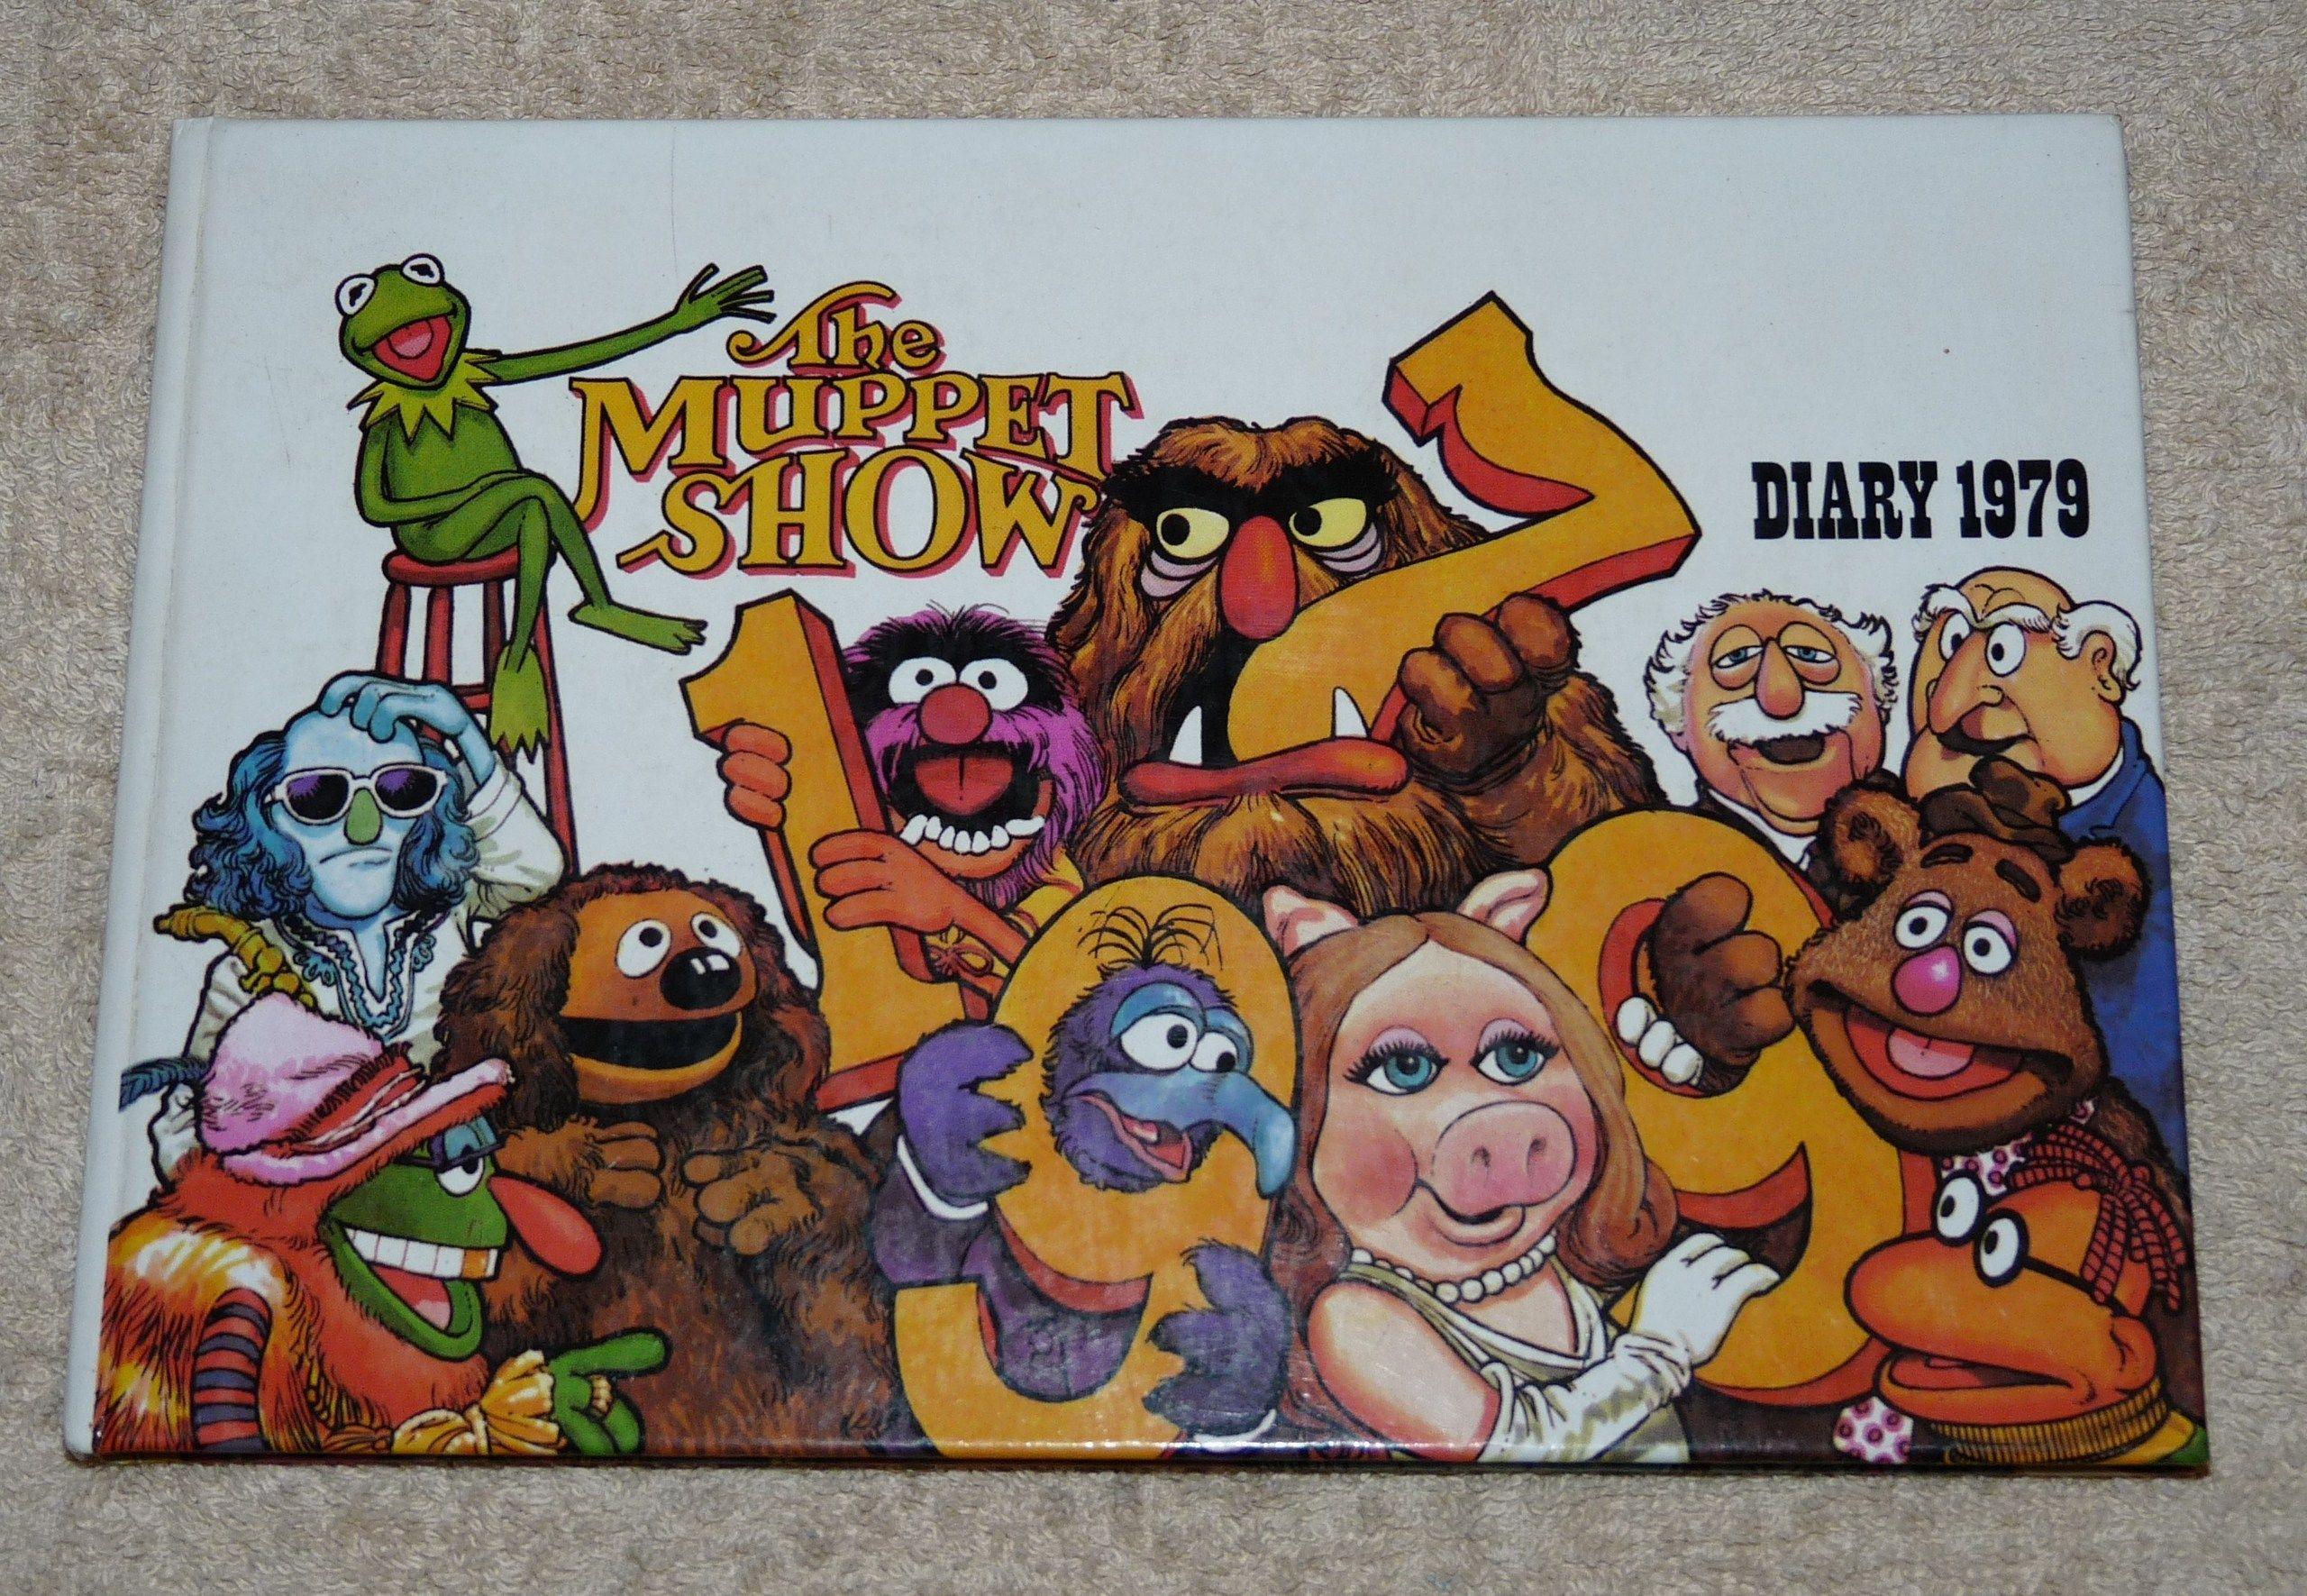 The Muppet Show image 1979 Diary cover and autographs HD wallpaper